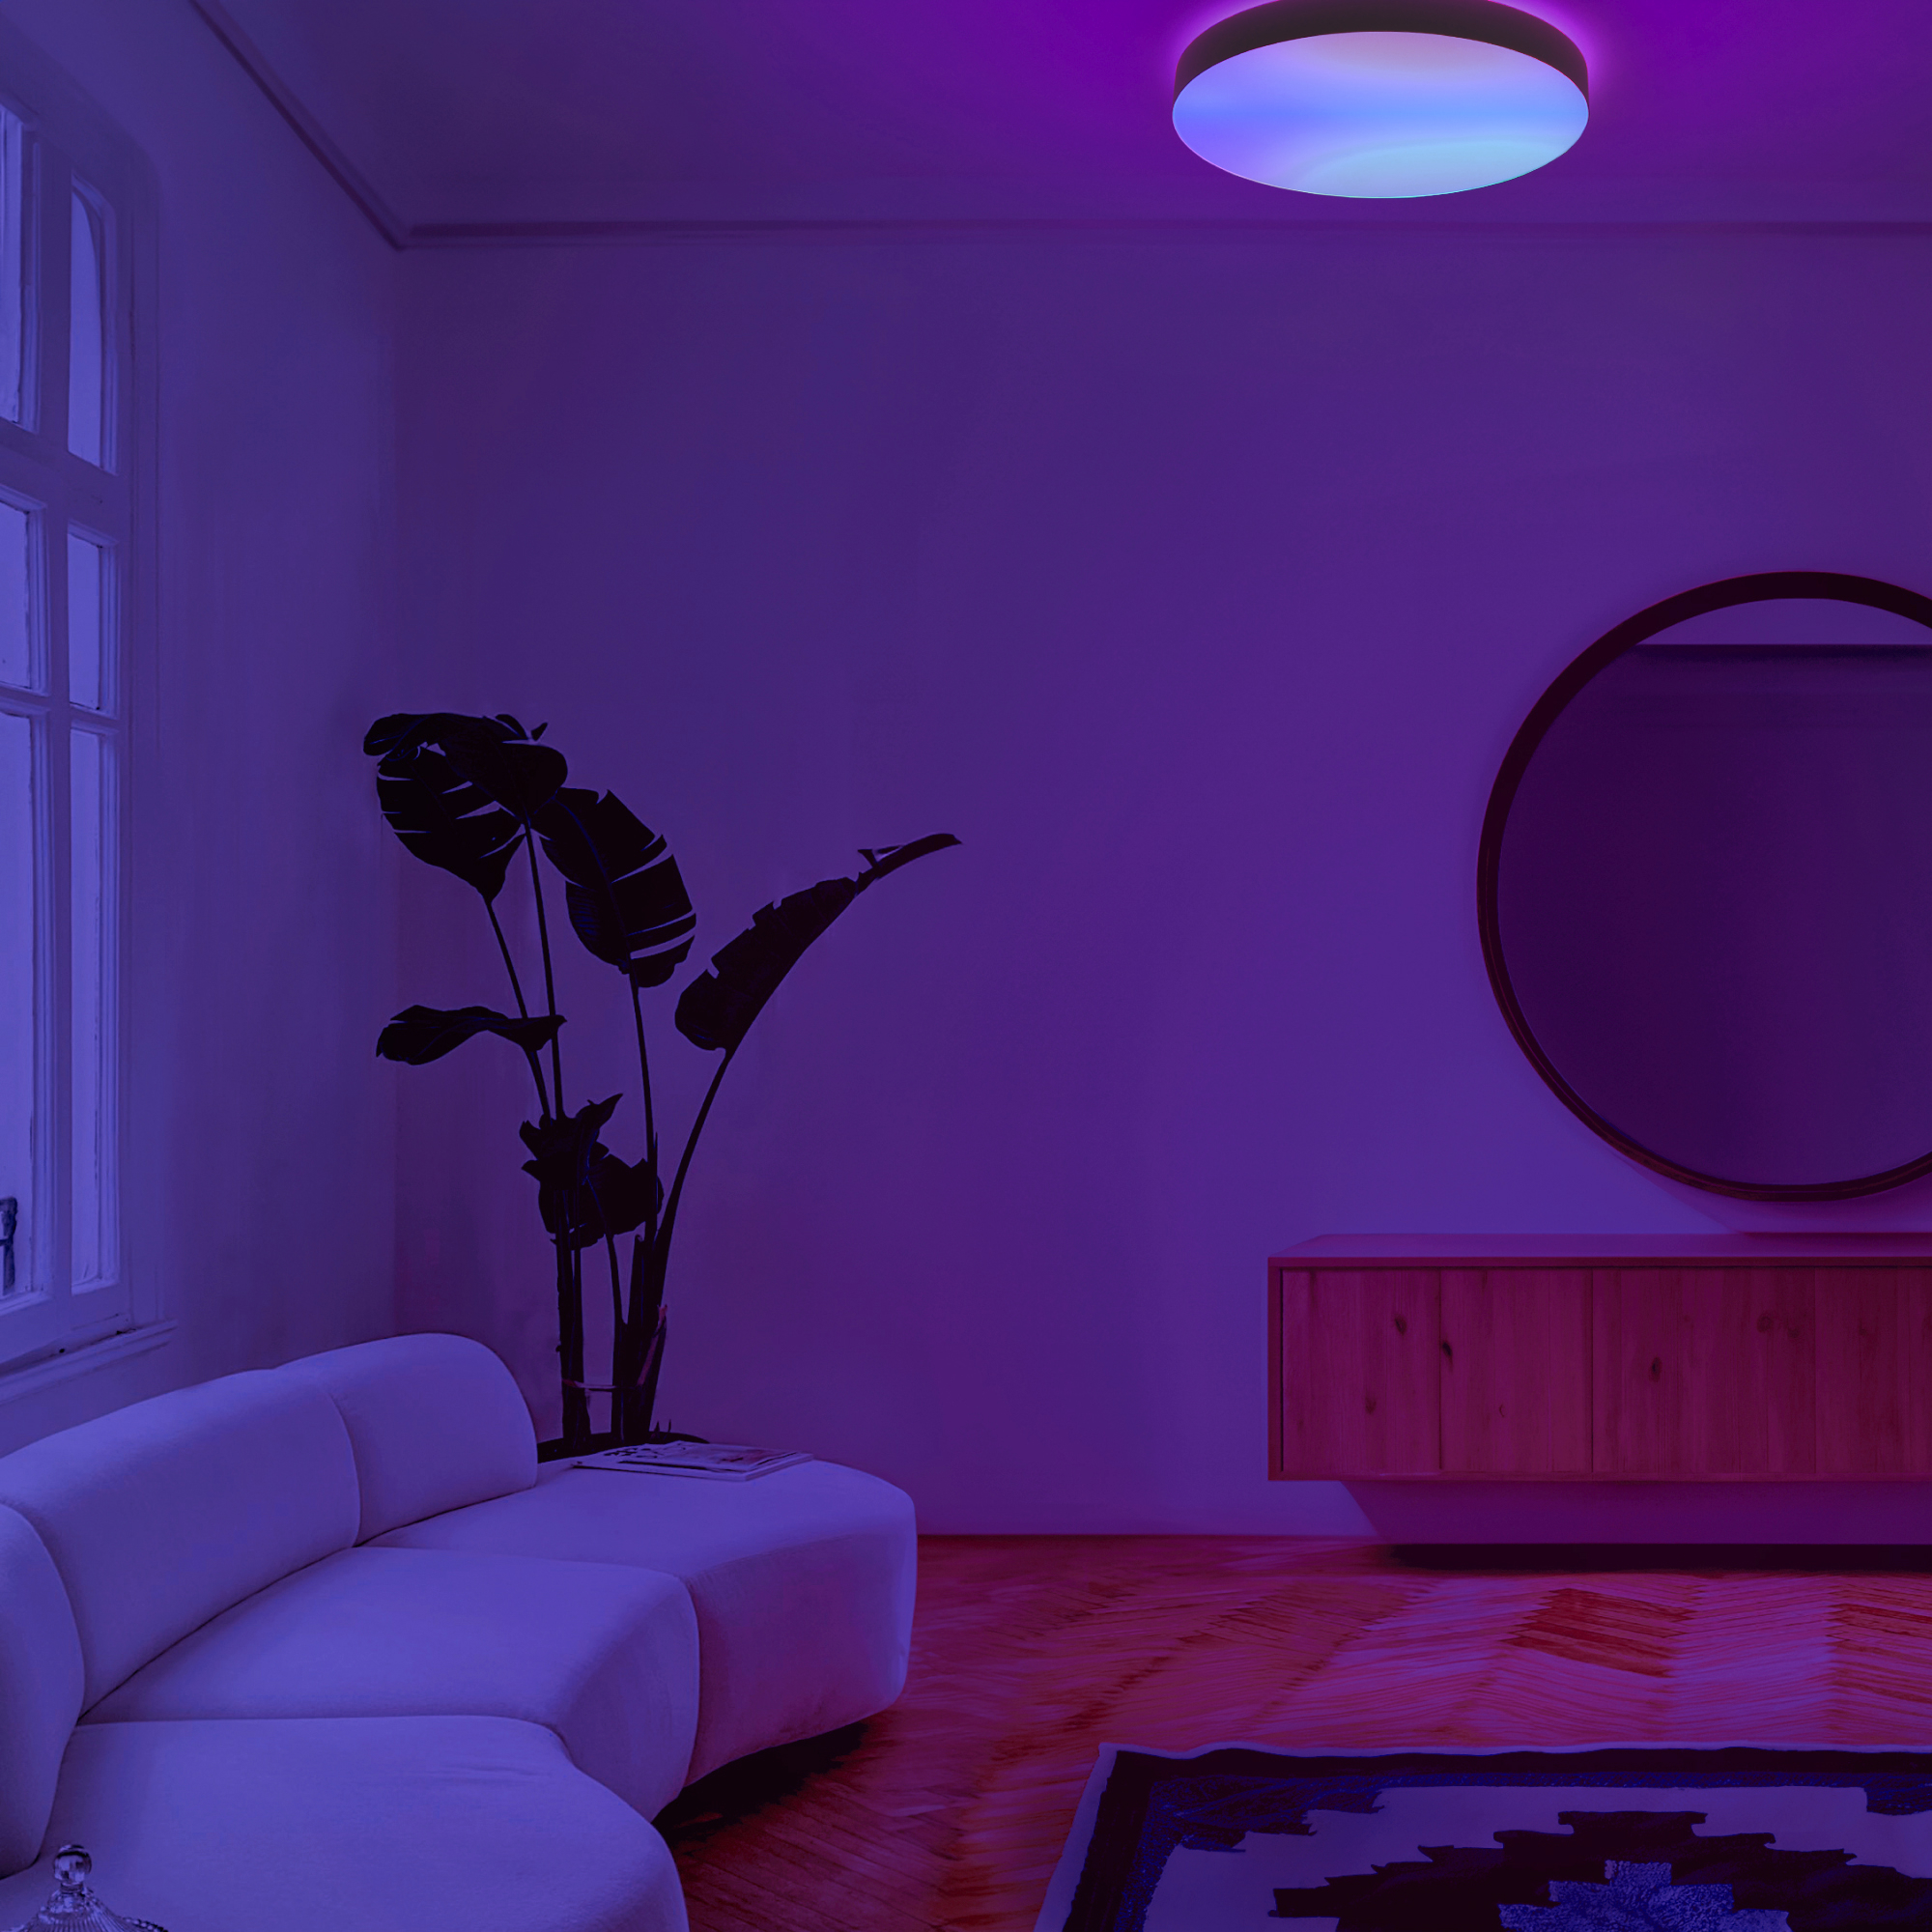 Drench your space in SuperColor with the LIFX Smart Color Ceiling Light with Nightlight.